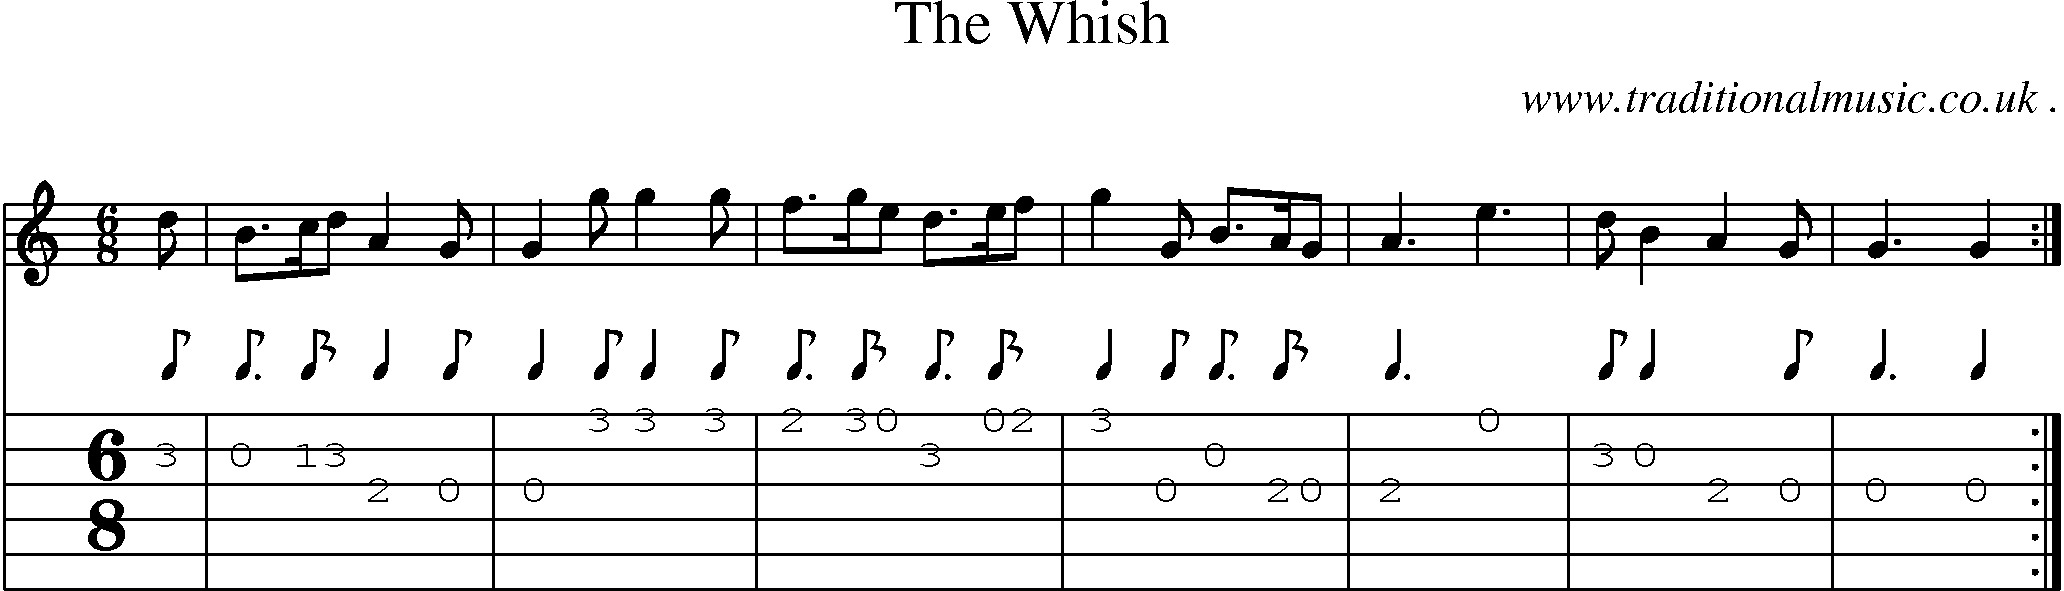 Sheet-Music and Guitar Tabs for The Whish